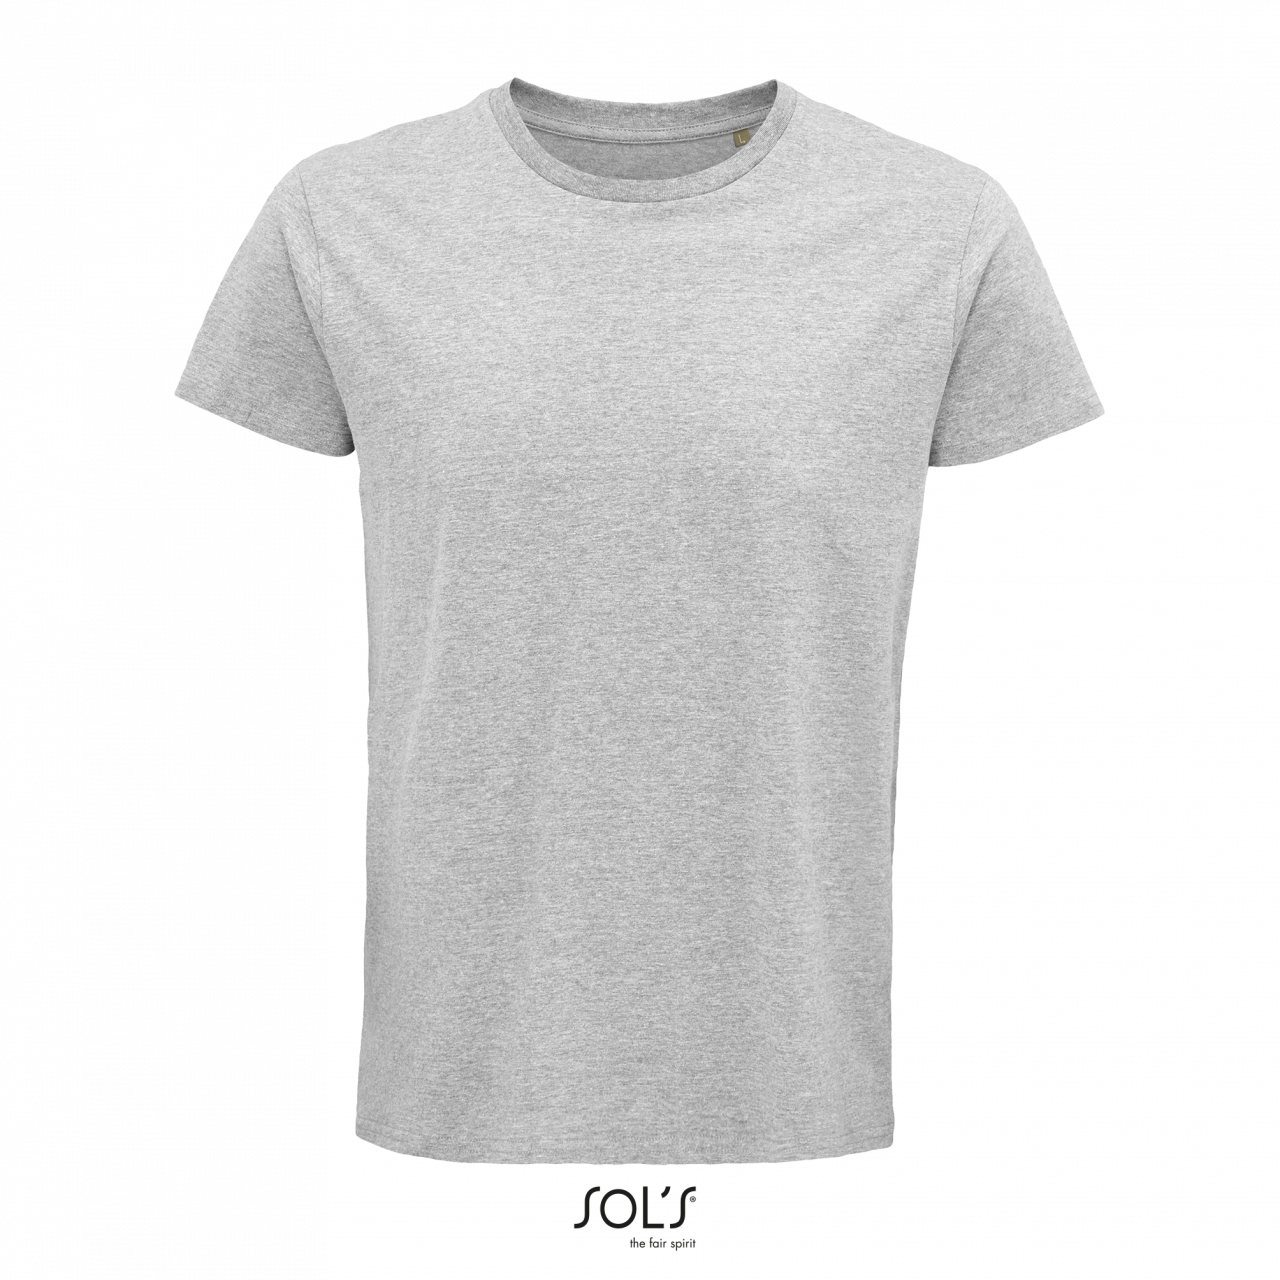 Sol's Crusader Men - Round-neck Fitted Jersey T-shirt - Sol's Crusader Men - Round-neck Fitted Jersey T-shirt - Sport Grey